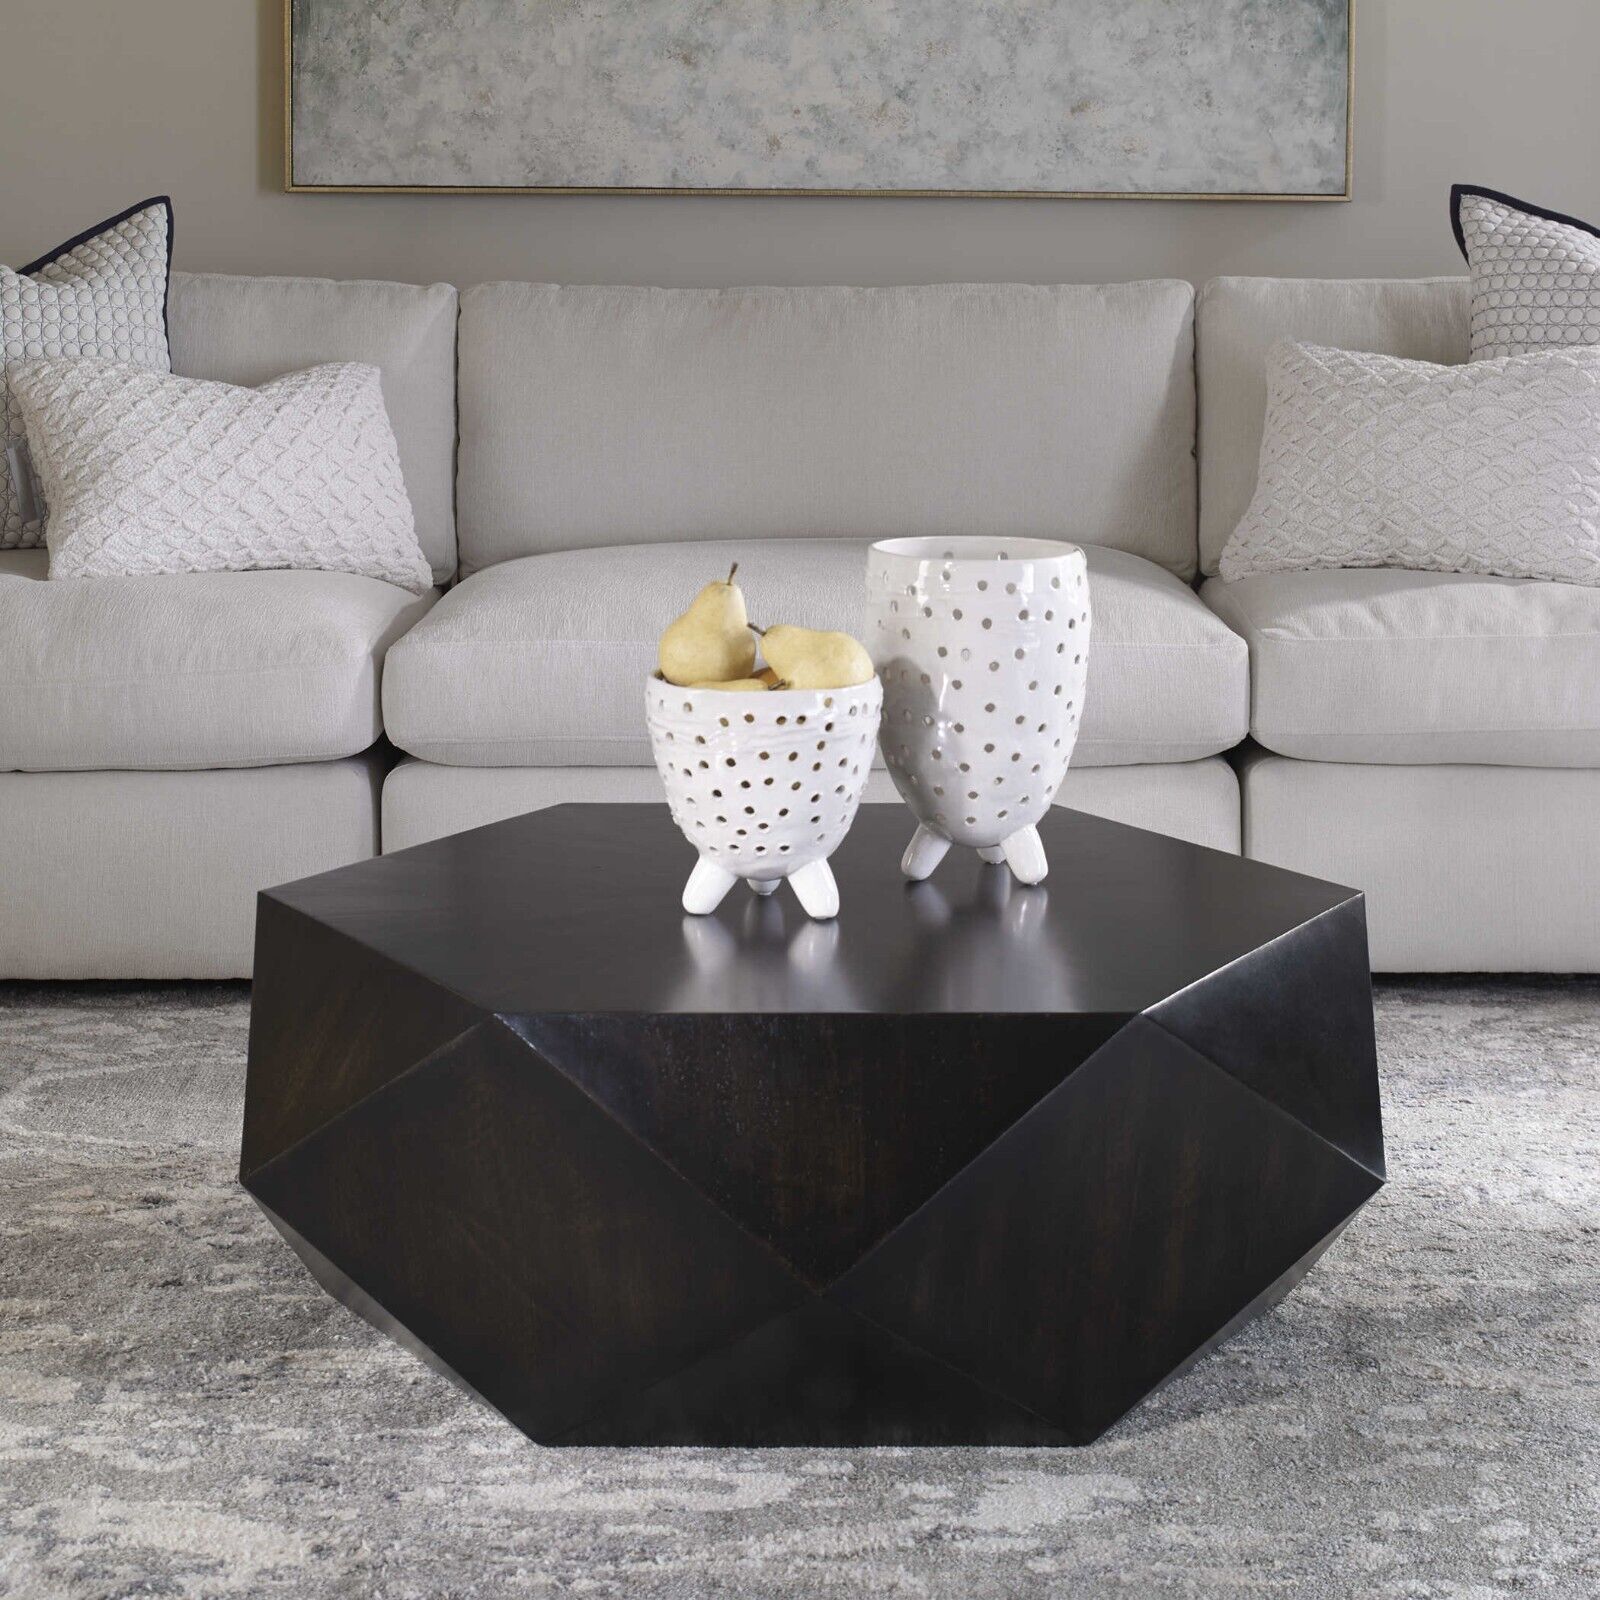 Geometric Modern Round Wood Coffee Table Faceted 40 In Block Solid  Distressed | Ebay Intended For Geometric Block Solid Coffee Tables (View 8 of 20)